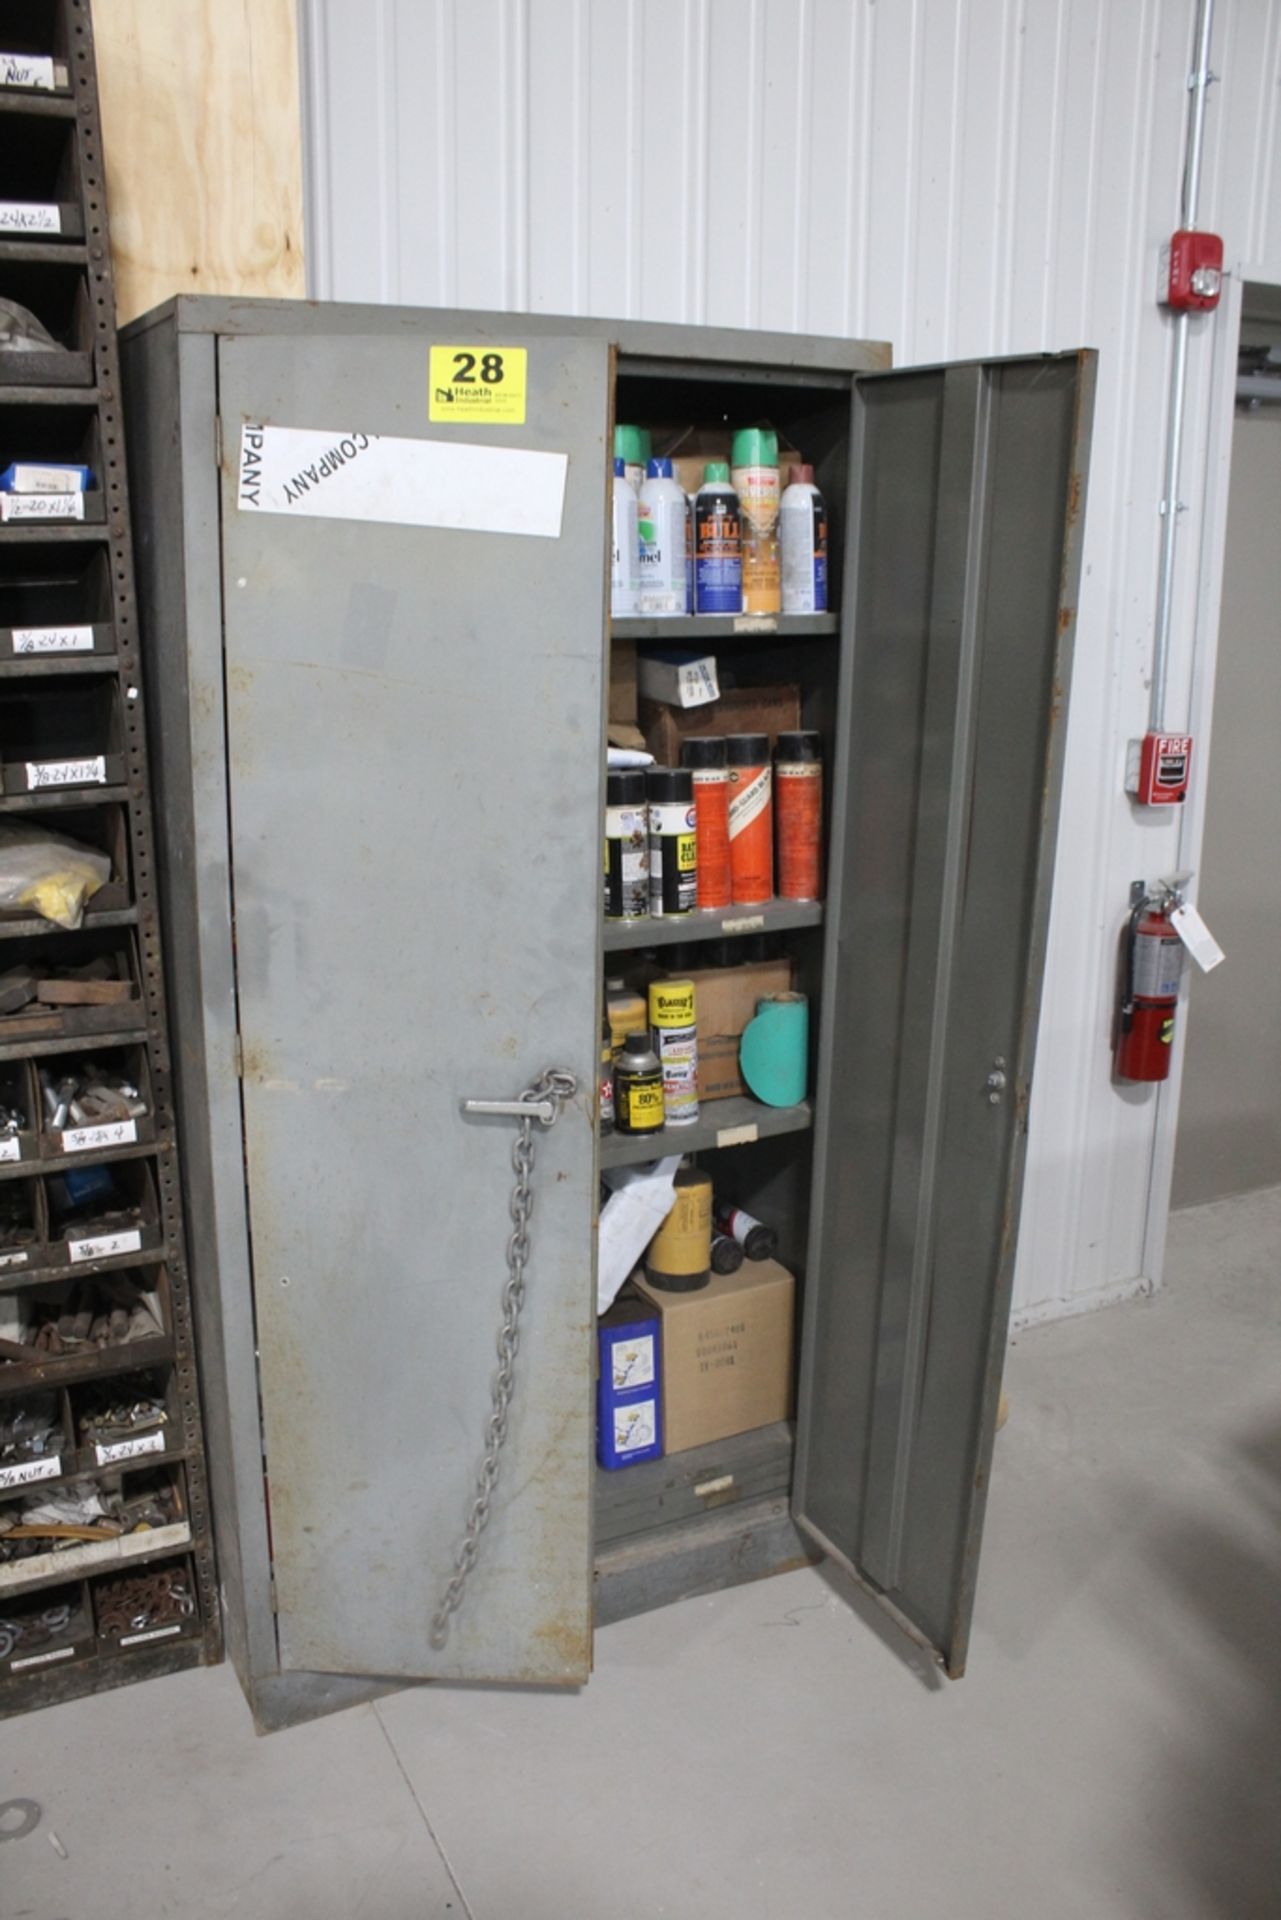 TWO DOOR STEEL CABINET, 72" X 36" X 18", WITH CONTENTS OF ASSORTED SPRAYS, CLEANERS AND ADDITIVES